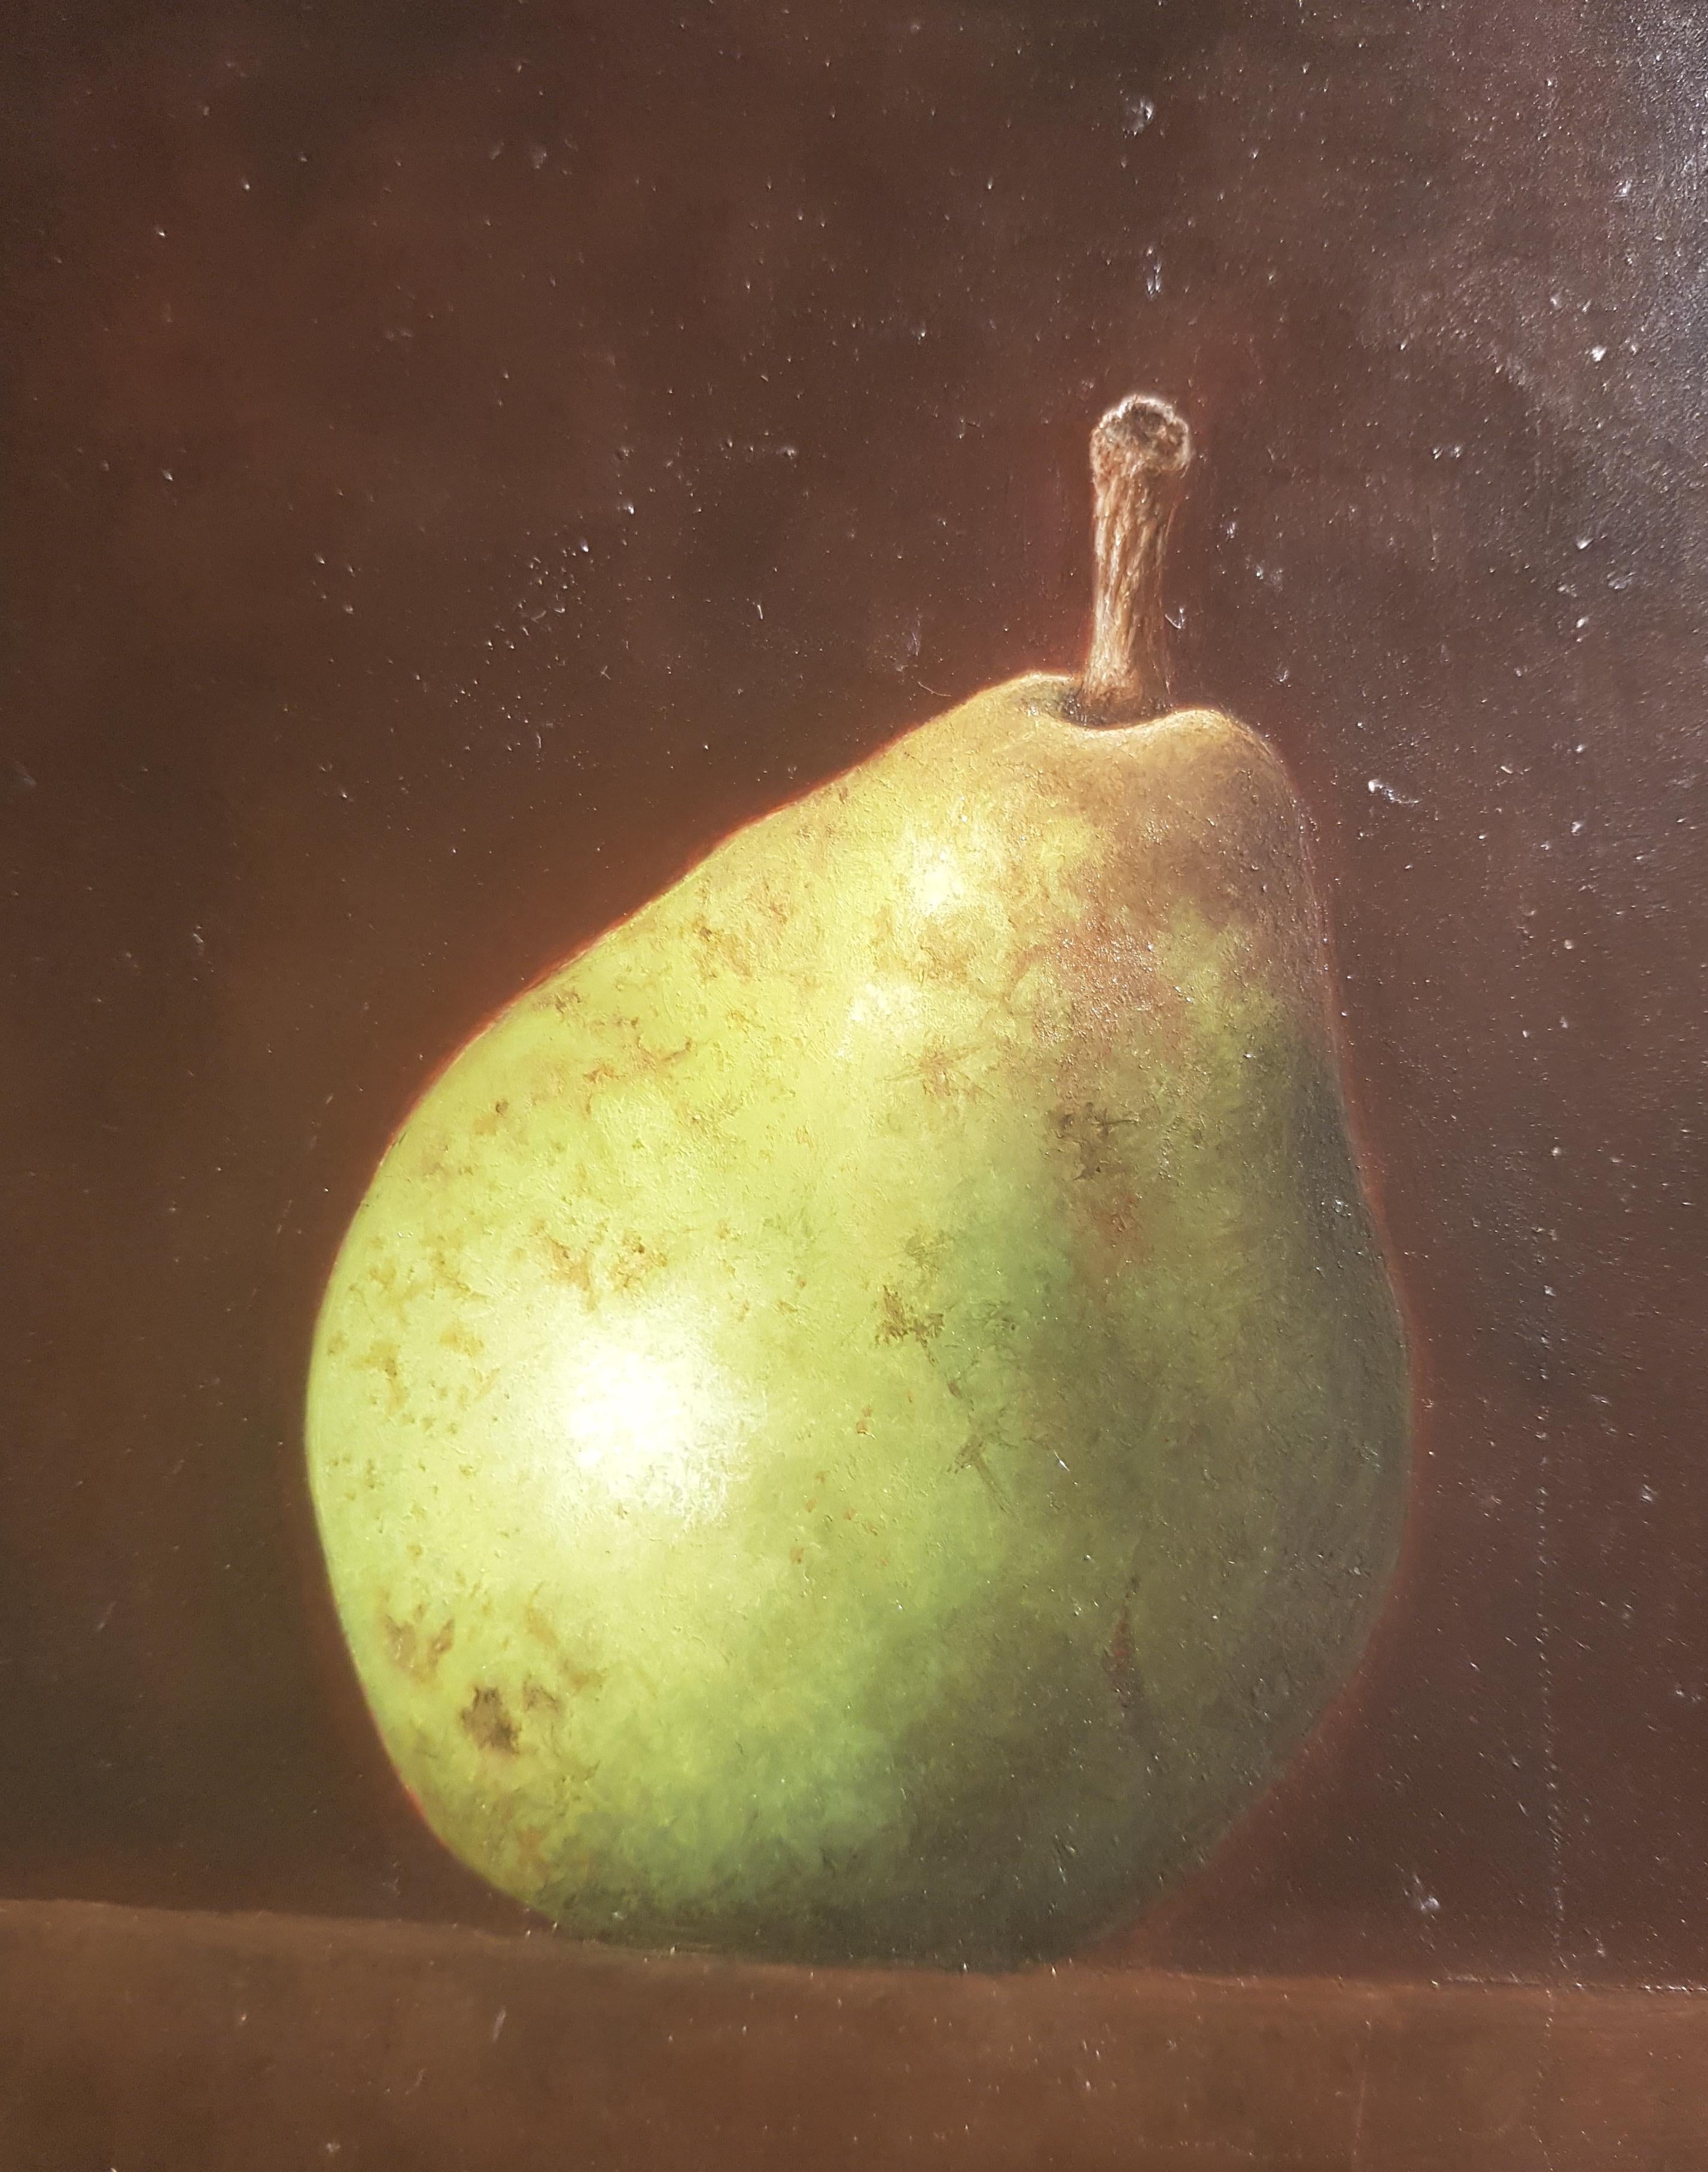  'Pear & Antique Glass' by Barbara Vanhove is an incredible Contemporary Realist Still-Life painting.


Barbara was born in Watermael-Boisfort in Belgium in 1974. She showed an incredible natural talent early on in her life and after school she